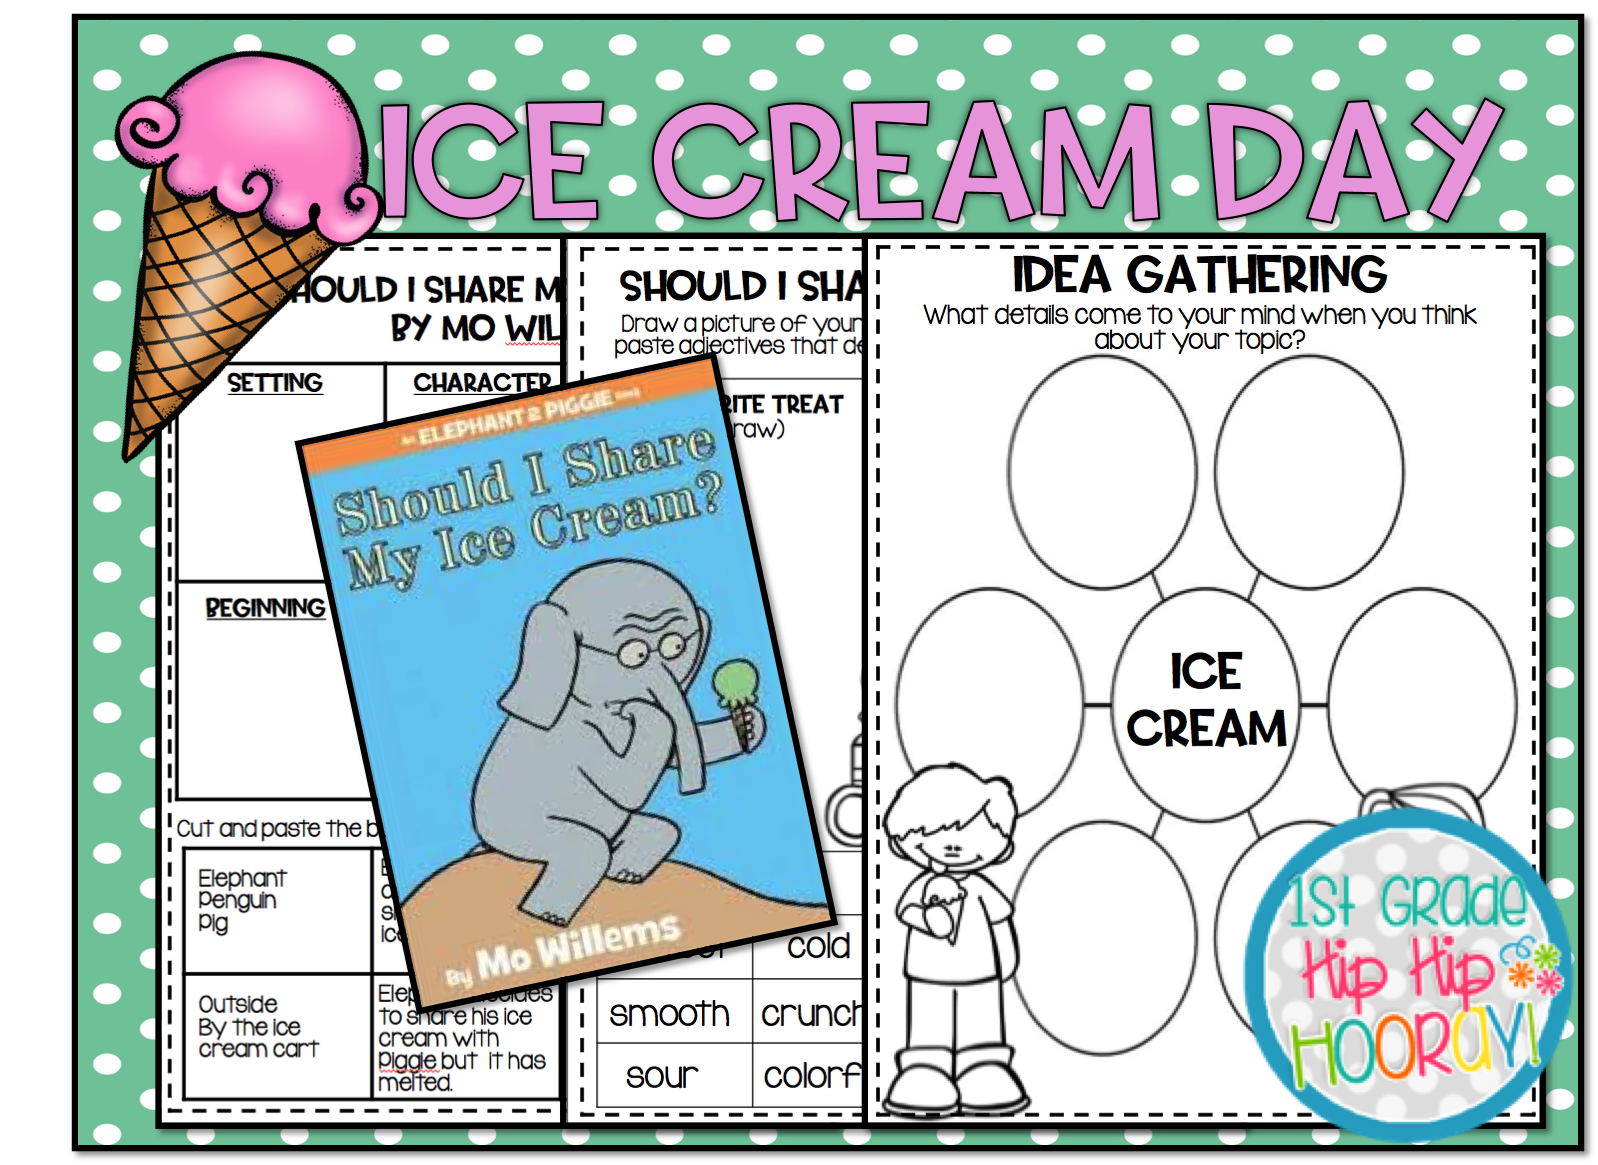 1st Grade Hip Hip Hooray!: Ice Cream Day...Perfect for End of the Year